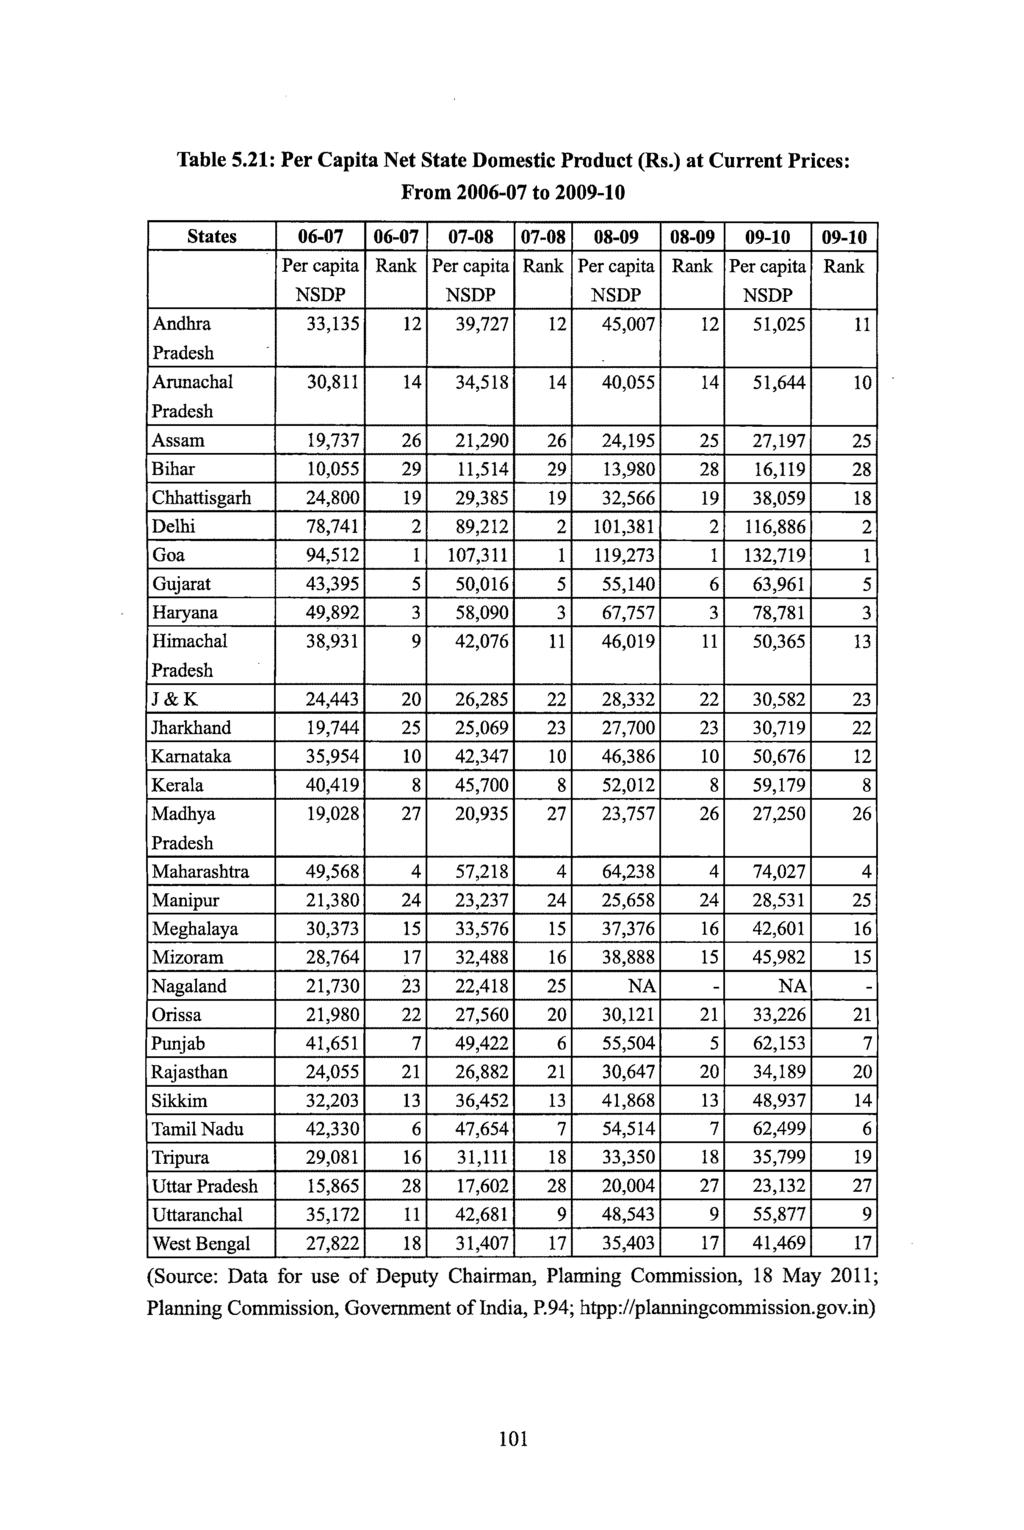 Table 5.21: Per Capita Net State Domestic Product (Rs.